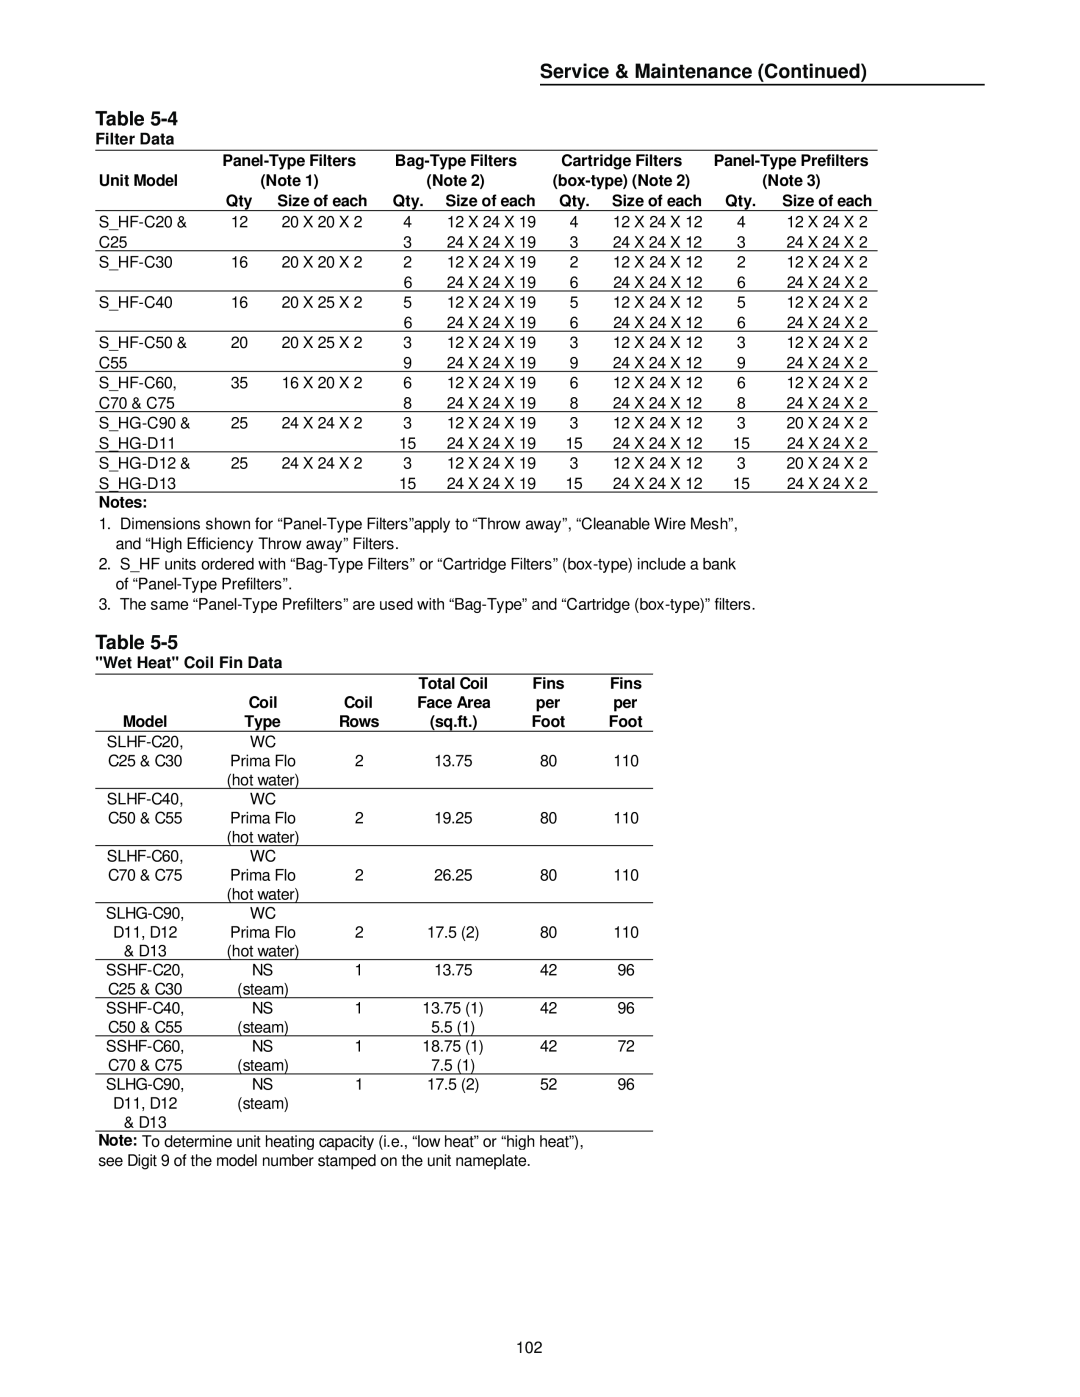 Trane RT-SVX10C-EN specifications Service & Maintenance Continued Table, Filter Data 